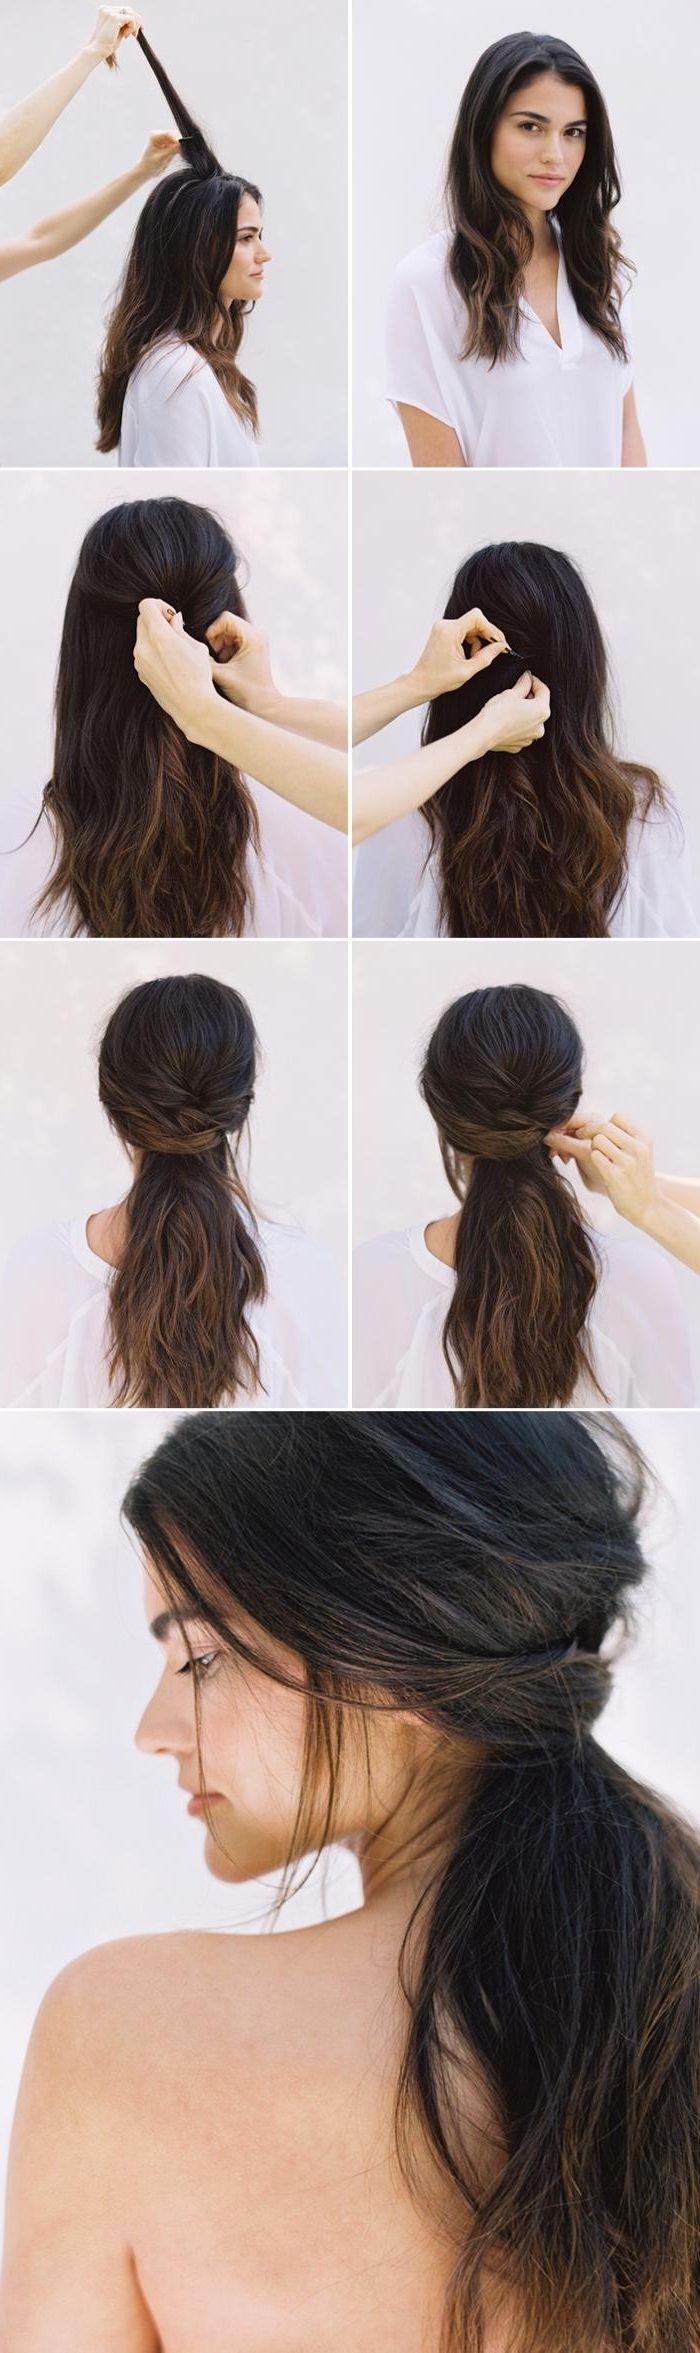 Hairstyles (View 4 of 20)